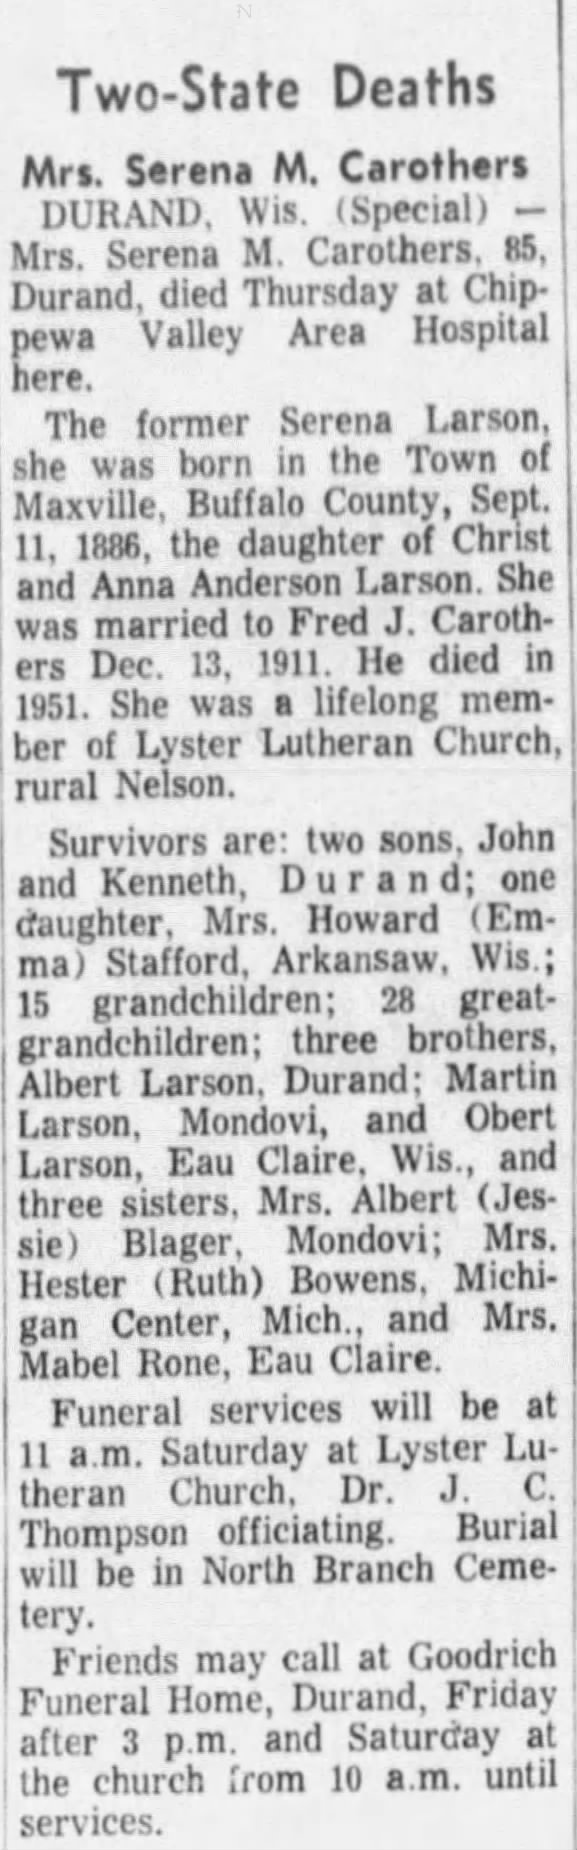 Obituary for Serena M. Carothers (Aged 85)